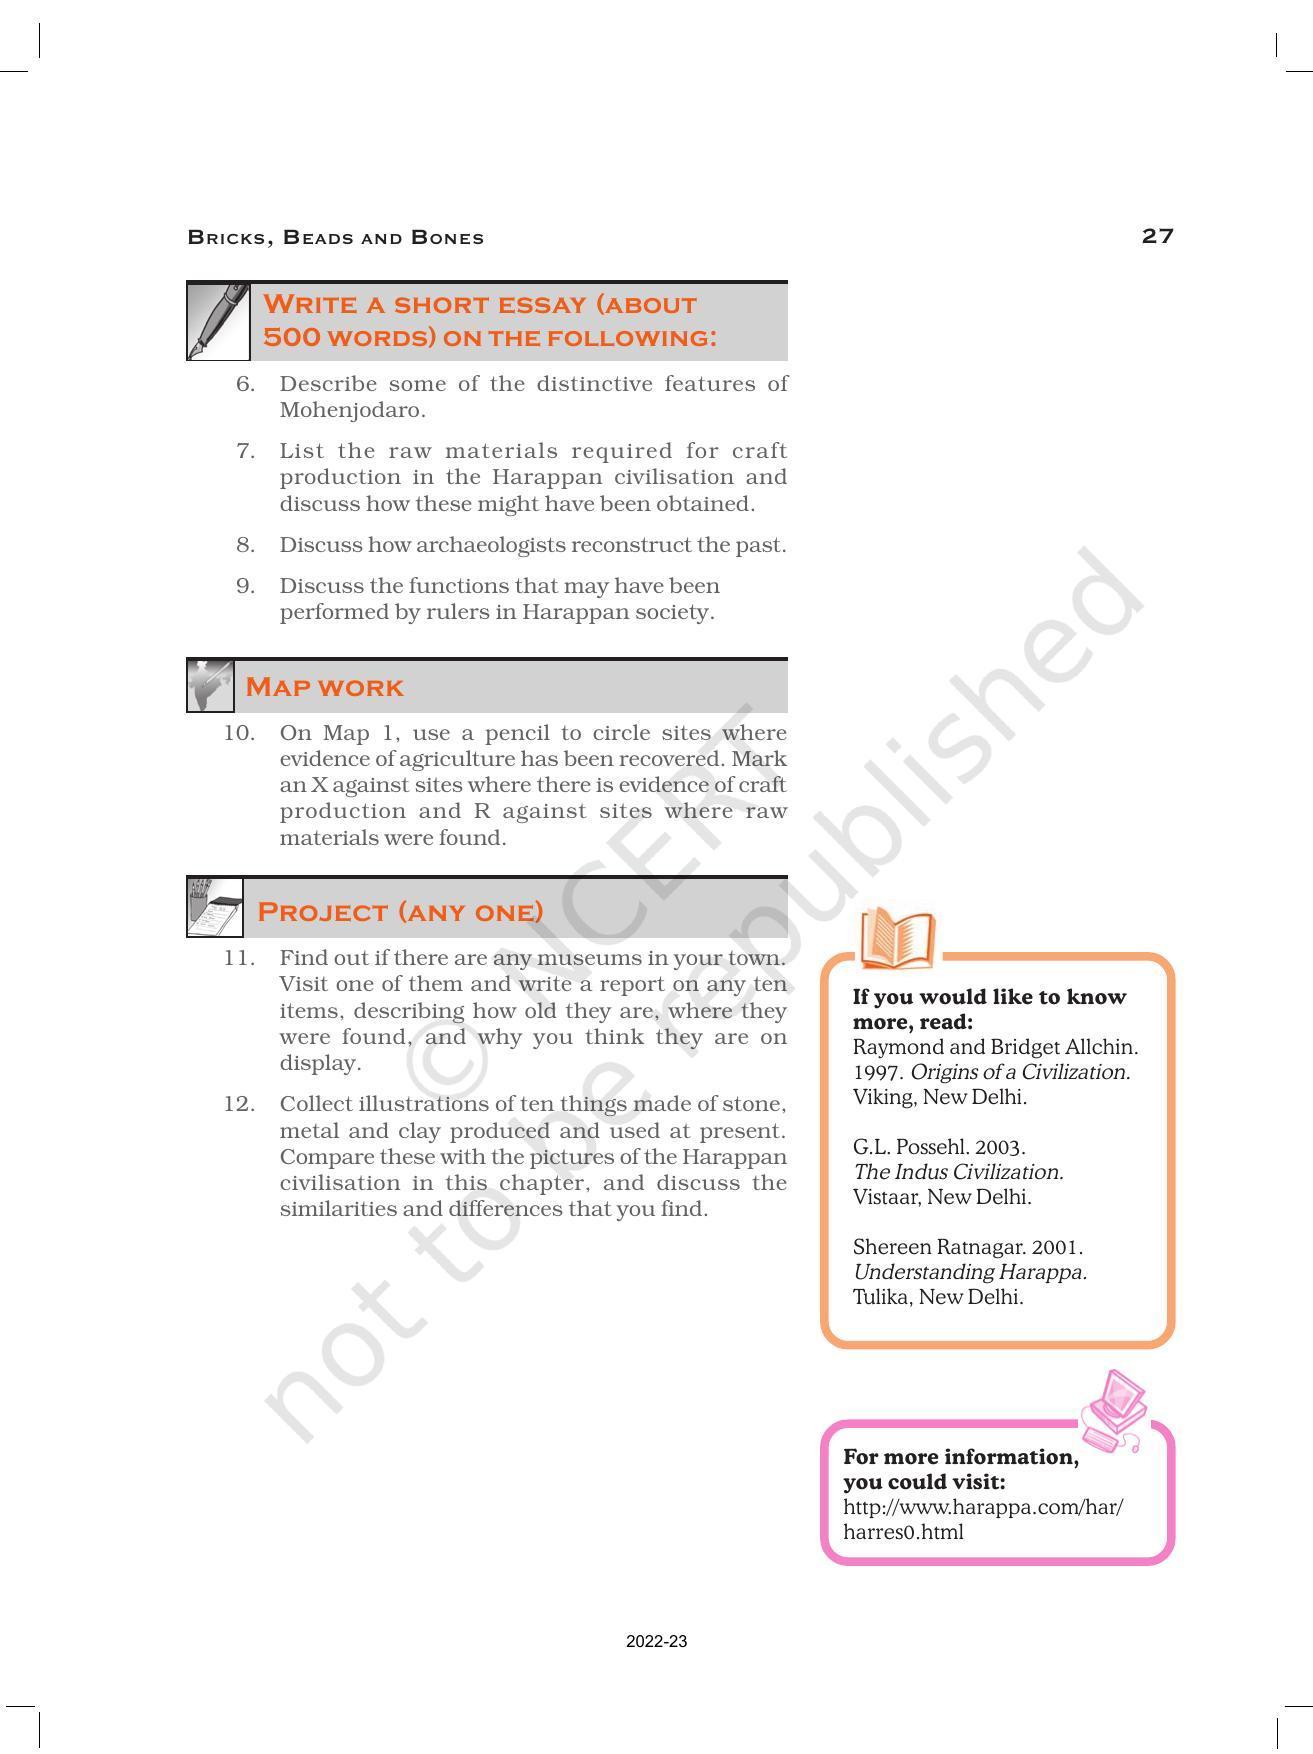 NCERT Book for Class 12 History (Part-1) Chapter 1 Bricks, Beads, and Bones - Page 27